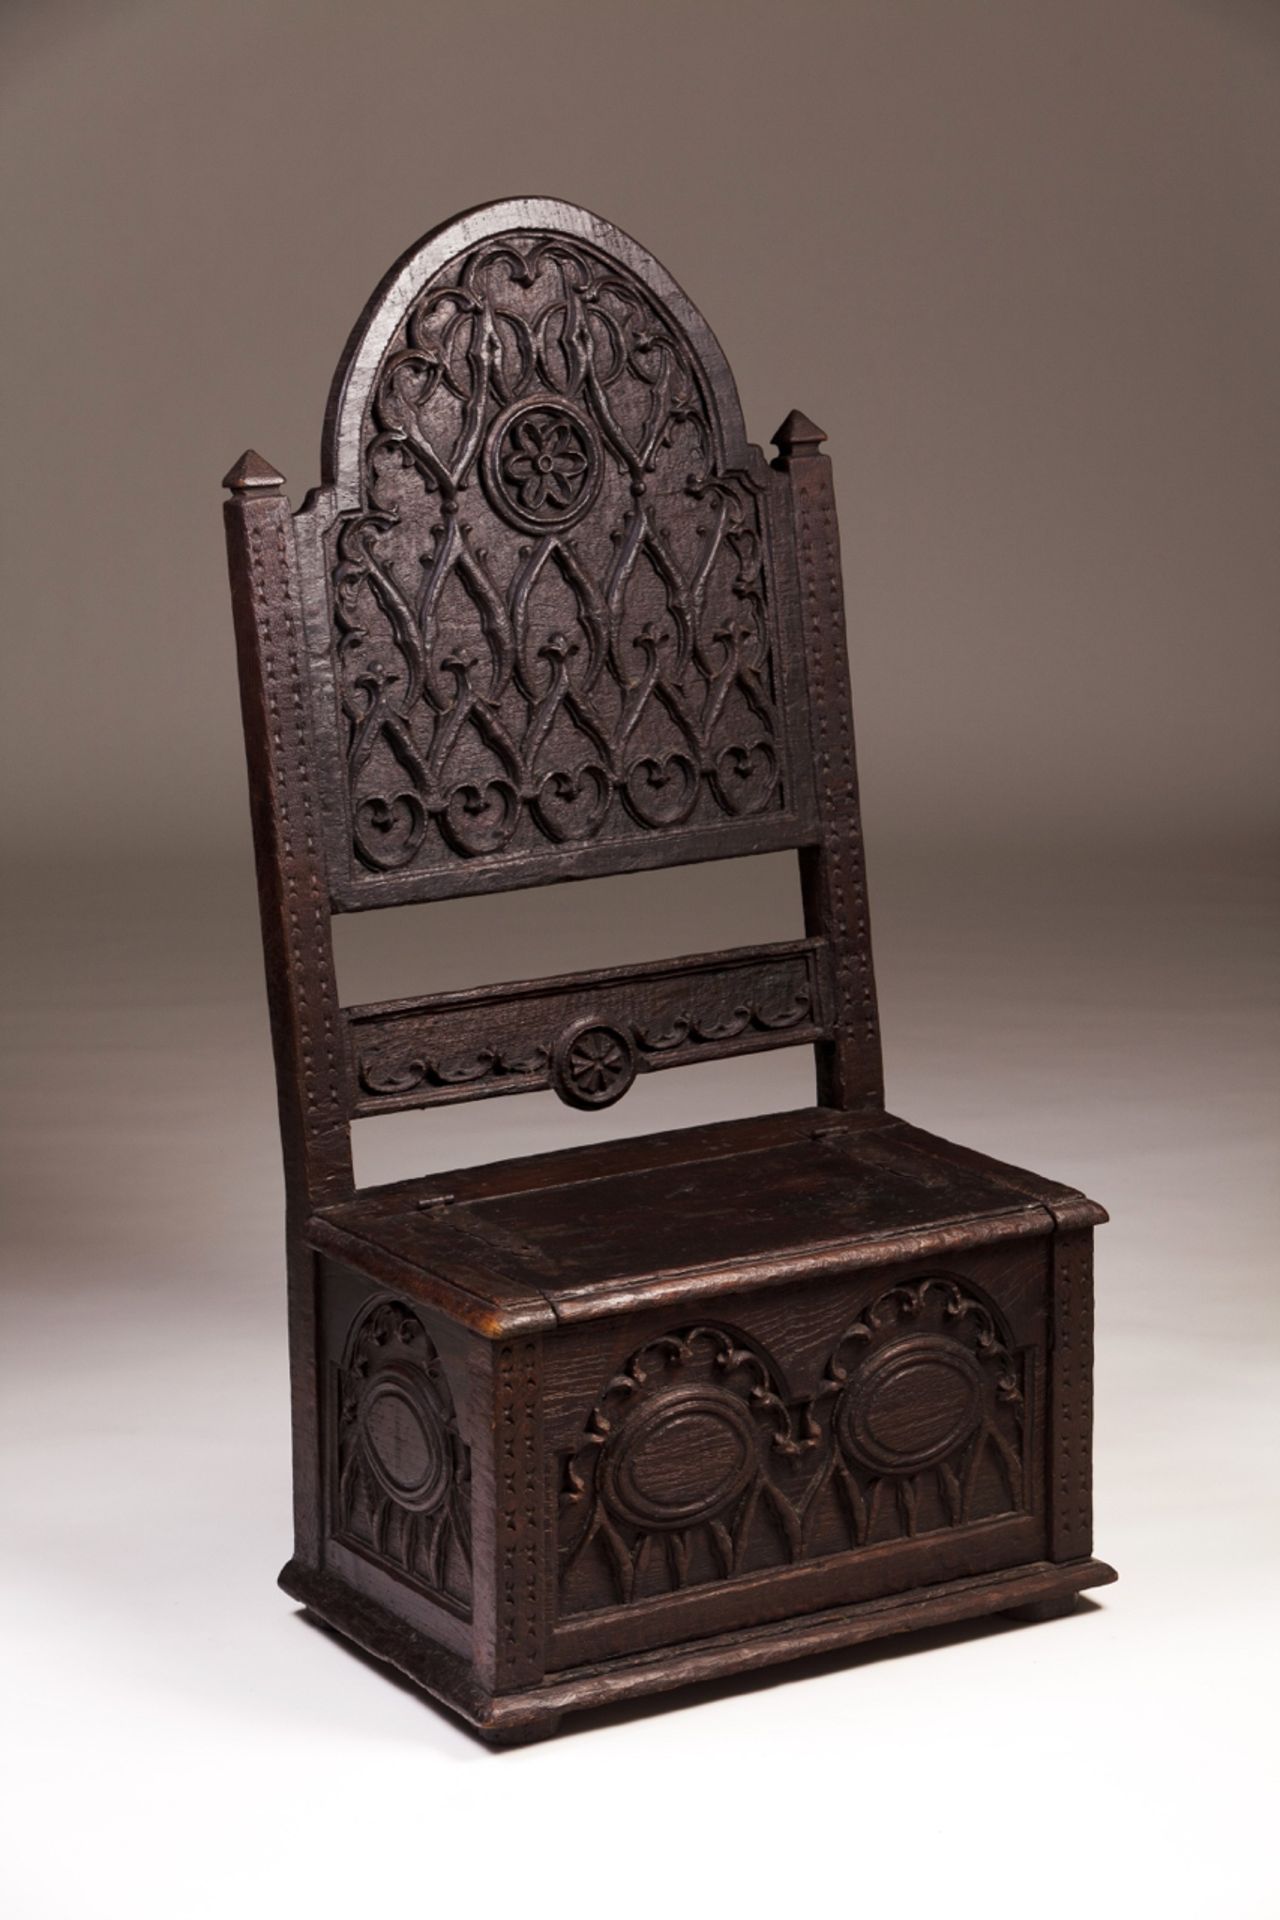 A 16th century oak chair/chest  Tall back with relief Manuelino decoration  Decorated front and